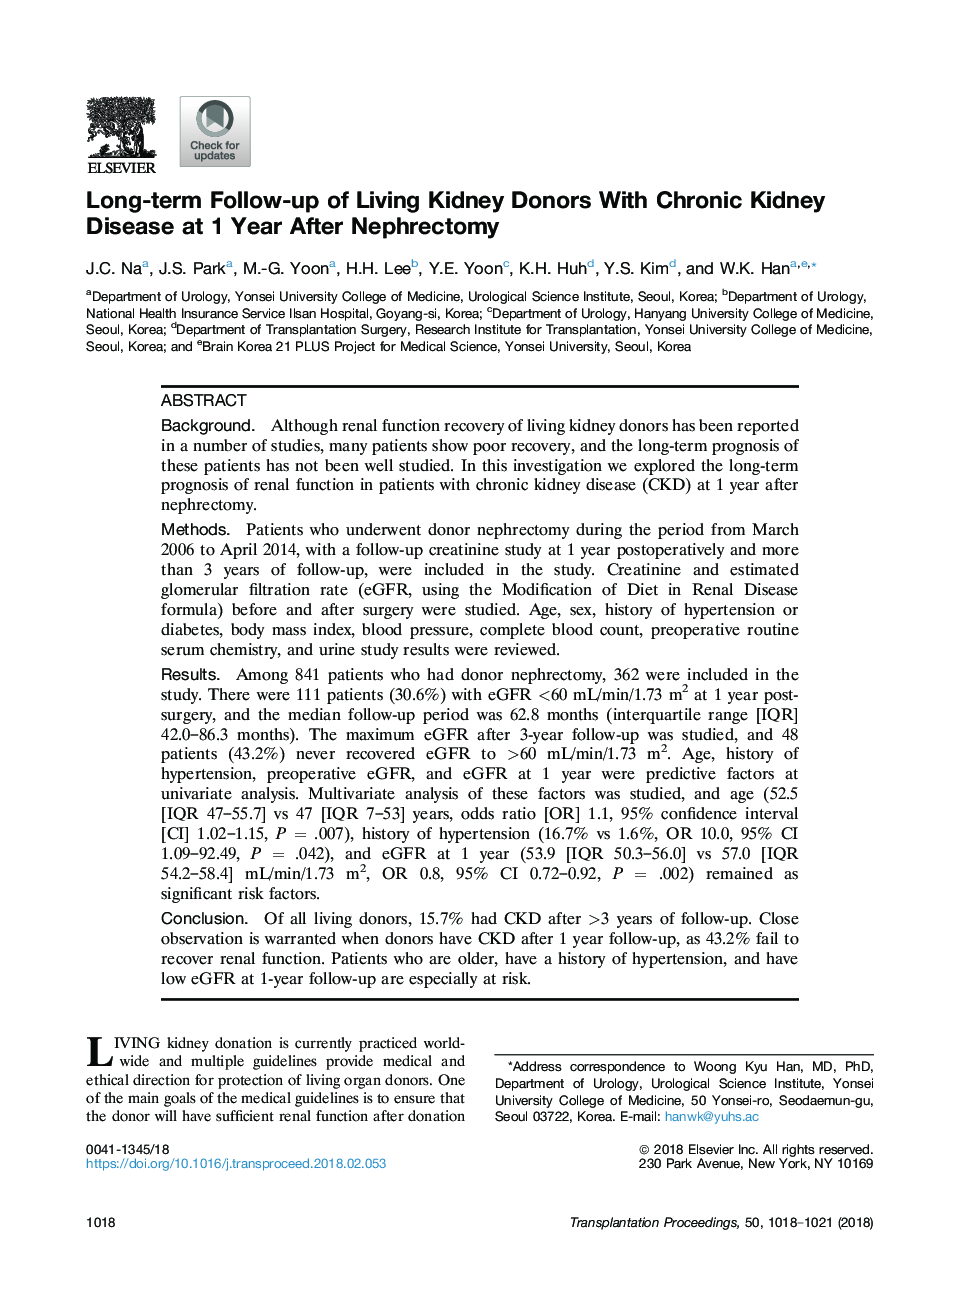 Long-term Follow-up of Living Kidney Donors With Chronic Kidney Disease at 1 Year After Nephrectomy